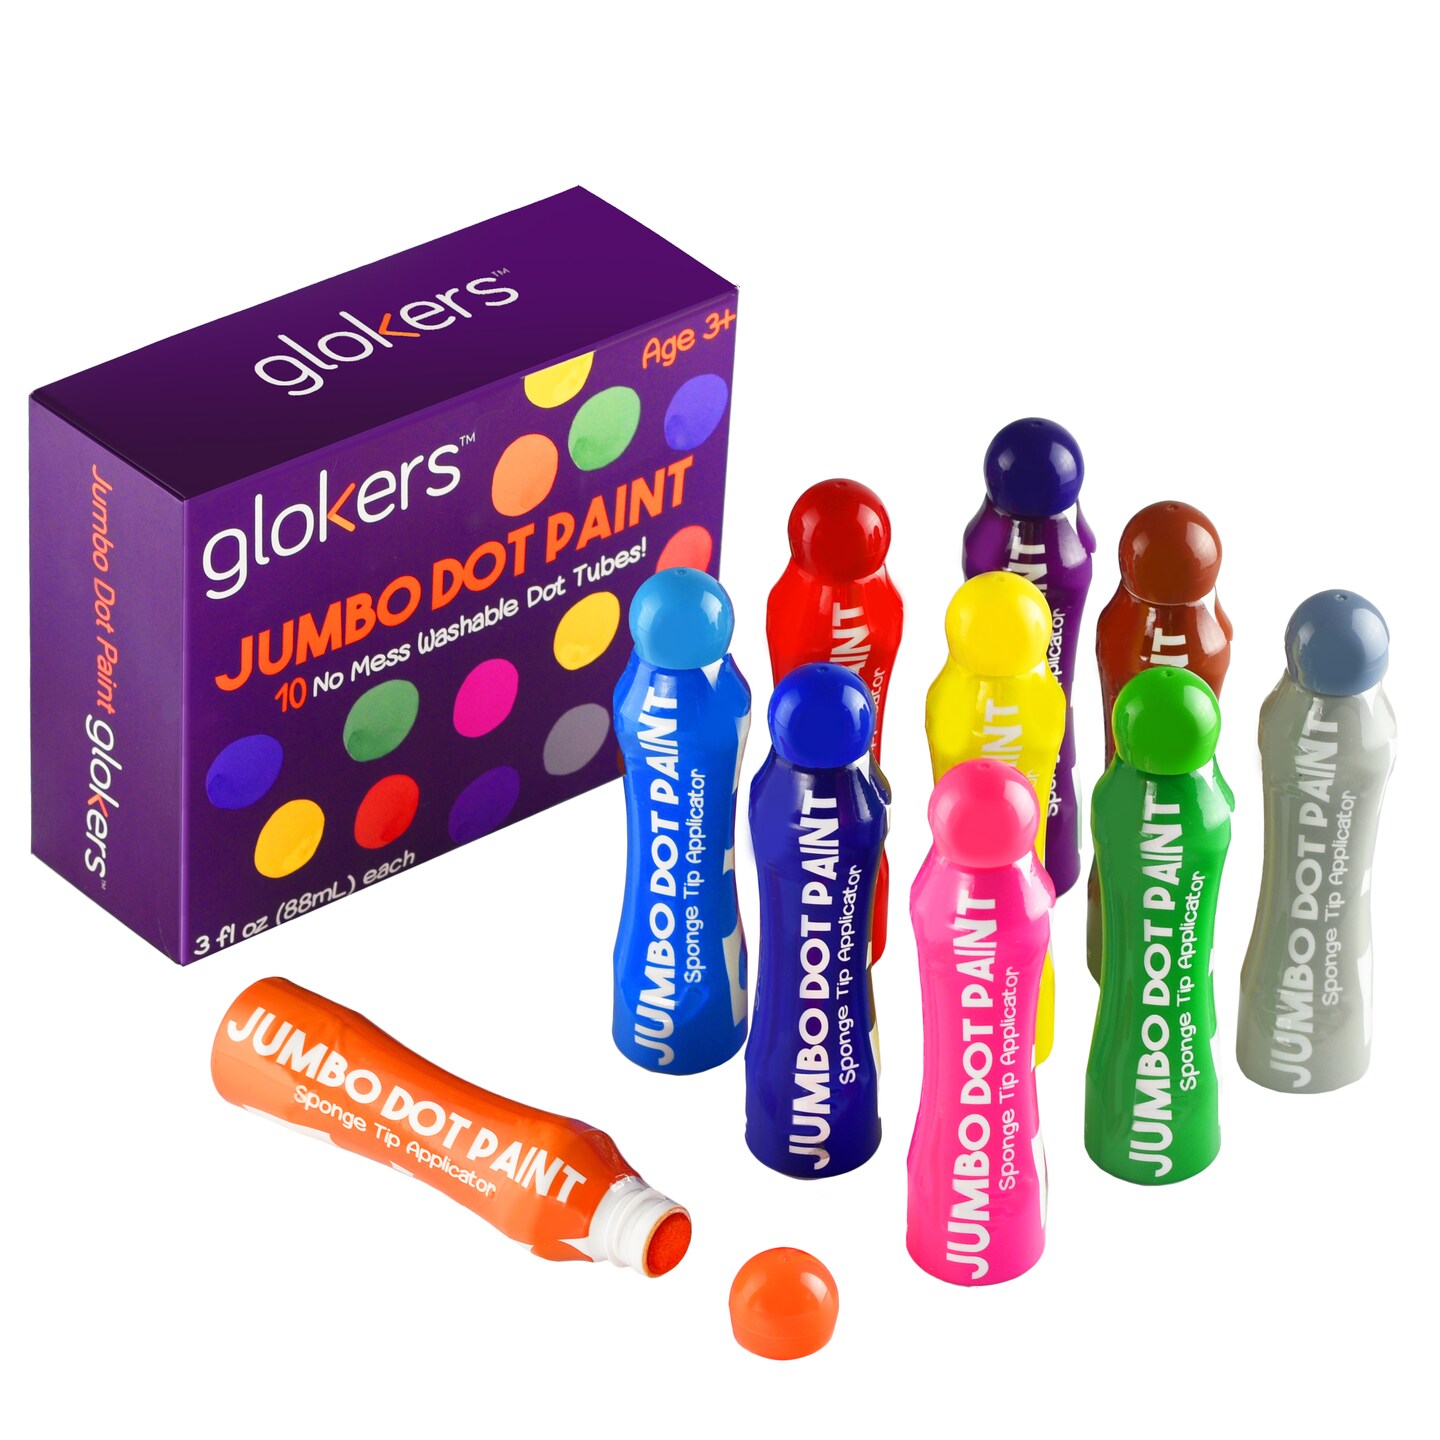 Washable Dot Markers for Kids with Free Activity Book | 10 Colors Set | Water-Based Non Toxic Paint Daubers | Dab Marker Kit for Toddlers 